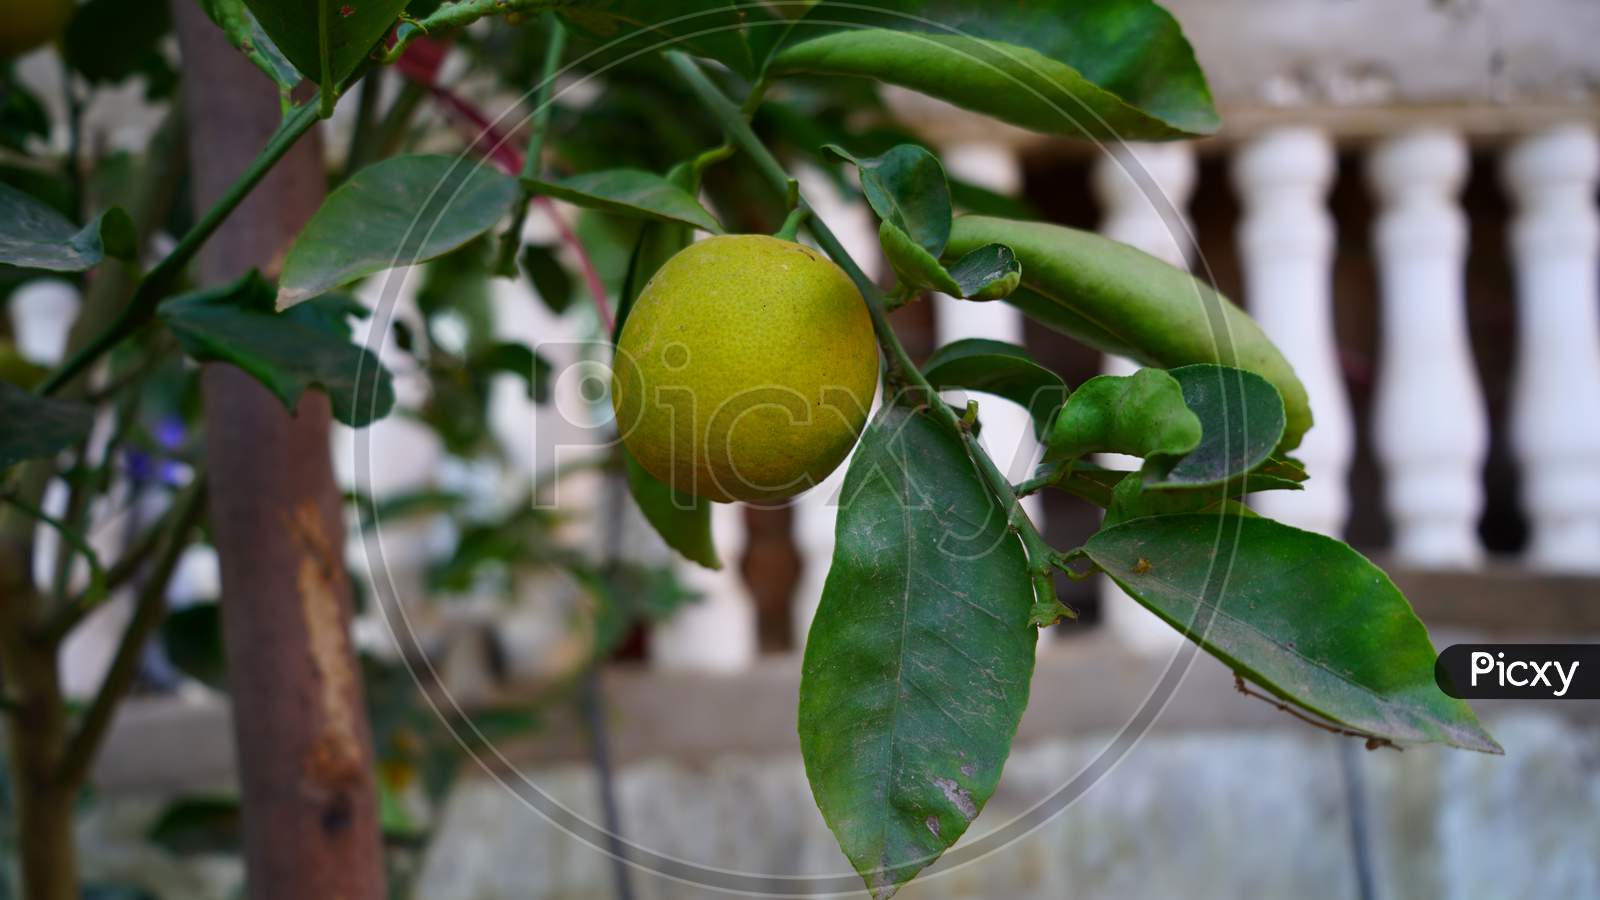 Fresh Yellow Lemon Or Citrus Filled With Juice Growing On A Lemon Tree With Attractive Green Leaves. Lemon Is The Source Of Vitamin C.